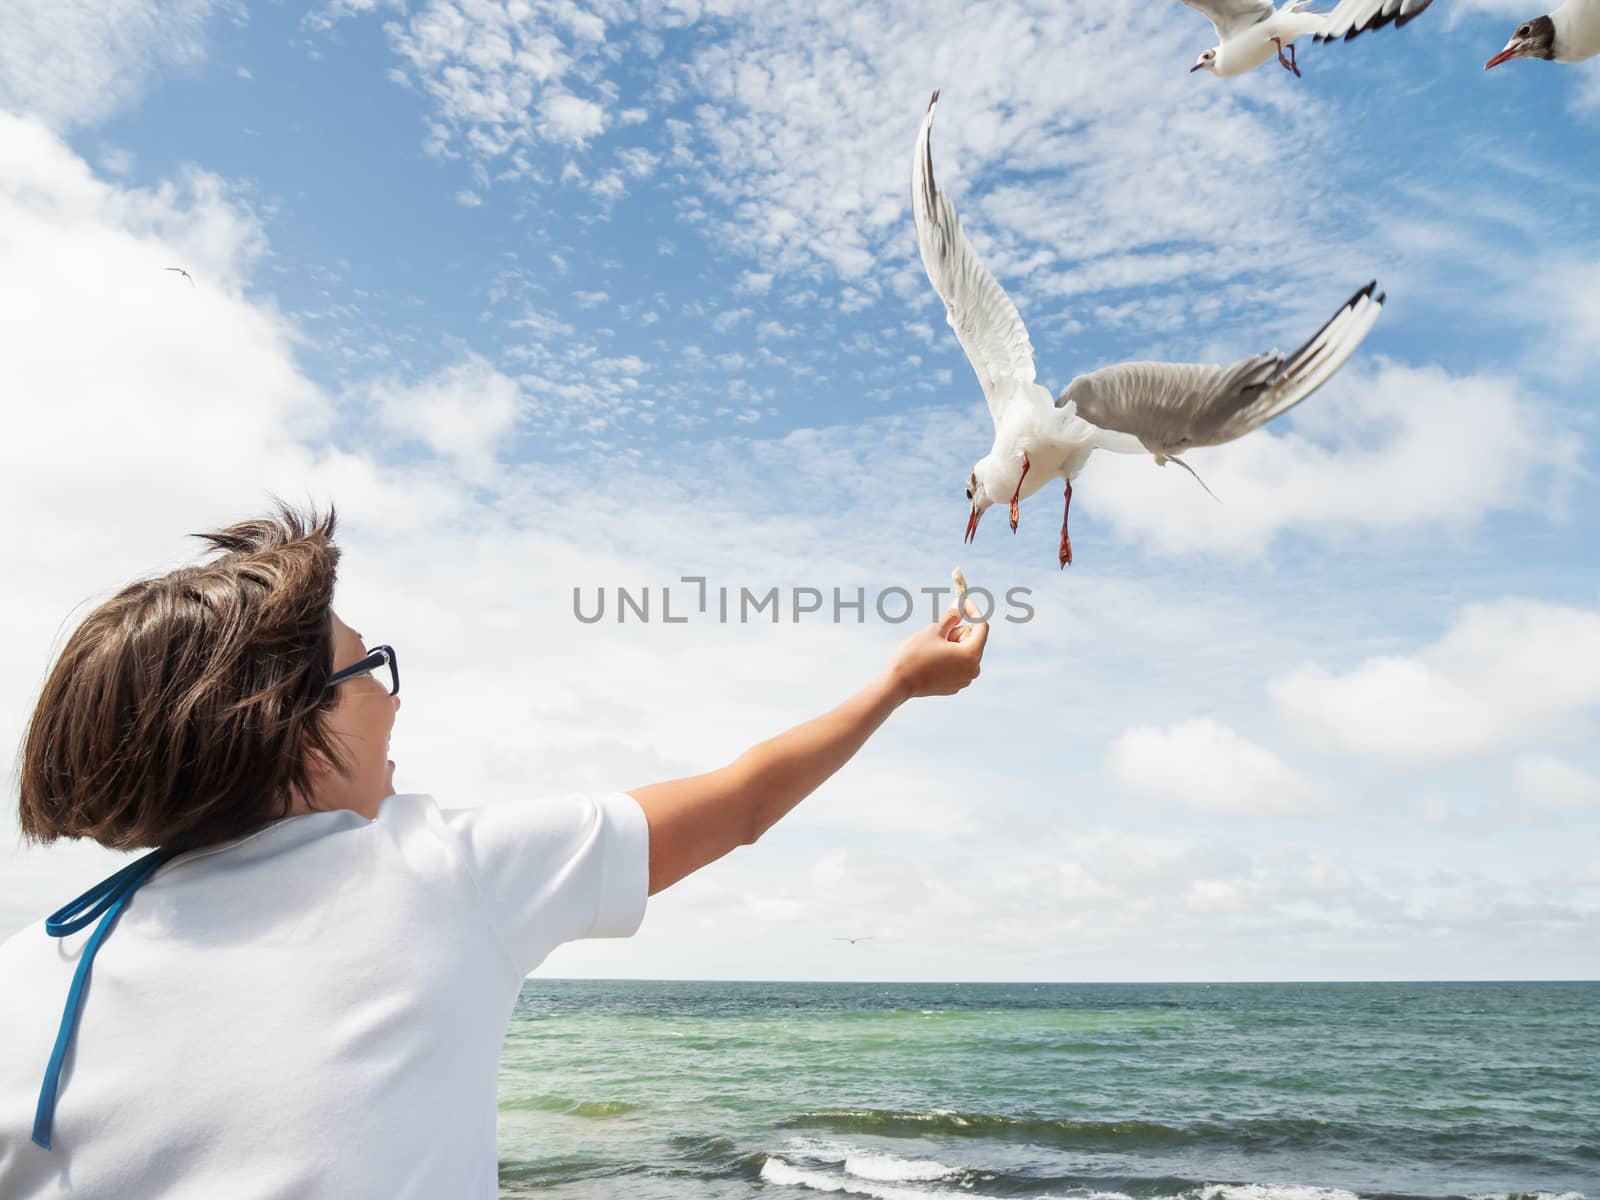 Woman feeds seagulls. Hungry noisy birds try to catch bread crust from woman's hand. Seascape in sunny day.